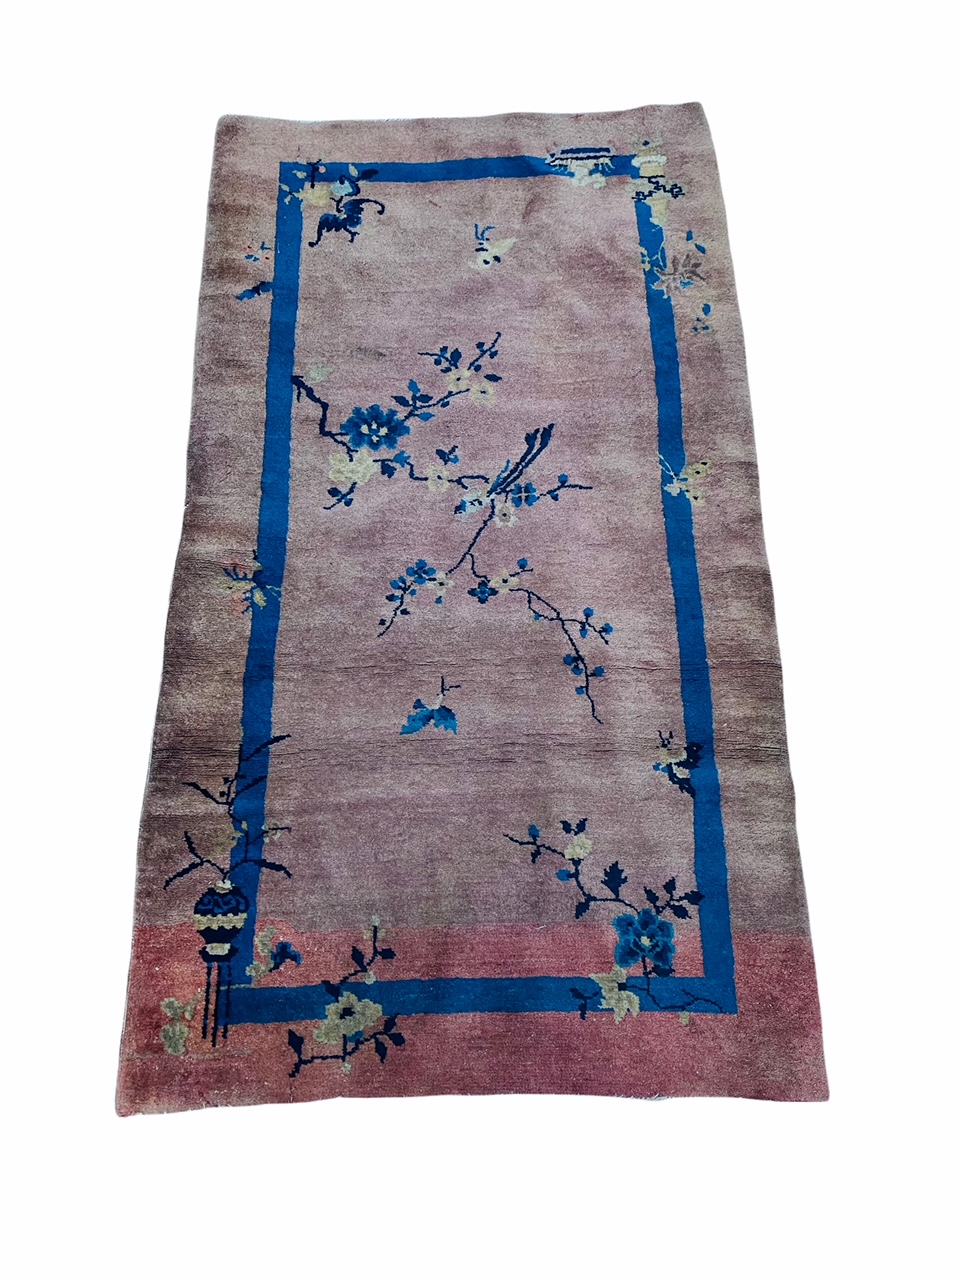 Antique Chinese Art Deco Scatter Rug, circa 1920 – antiques depot